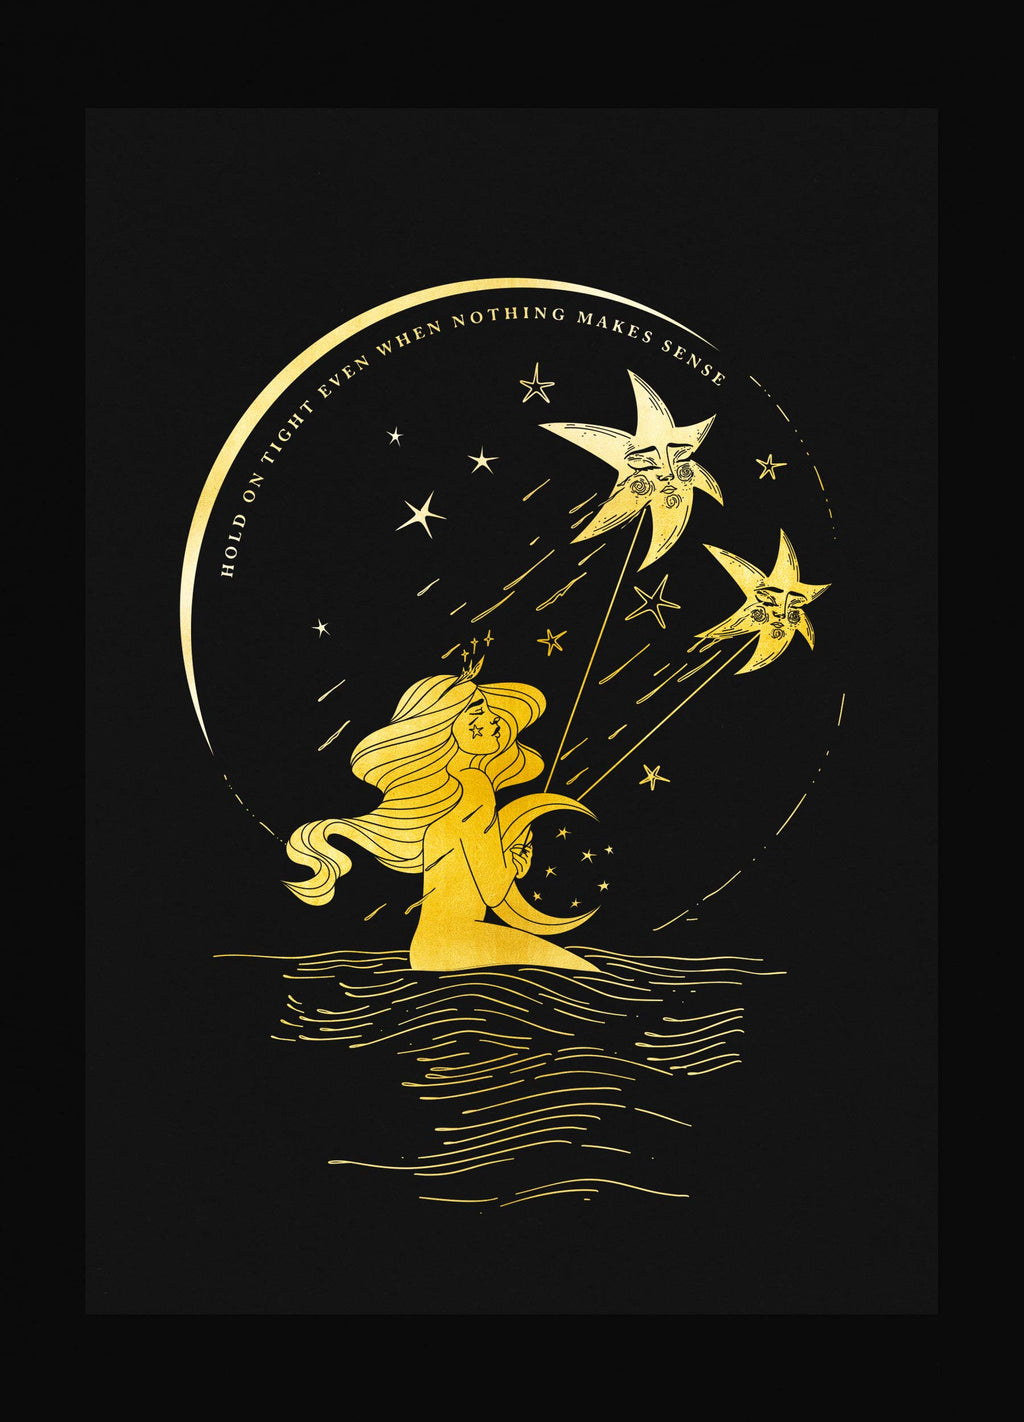 Hold On Star storm gold foil art print on black paper by Cocorrina & Co